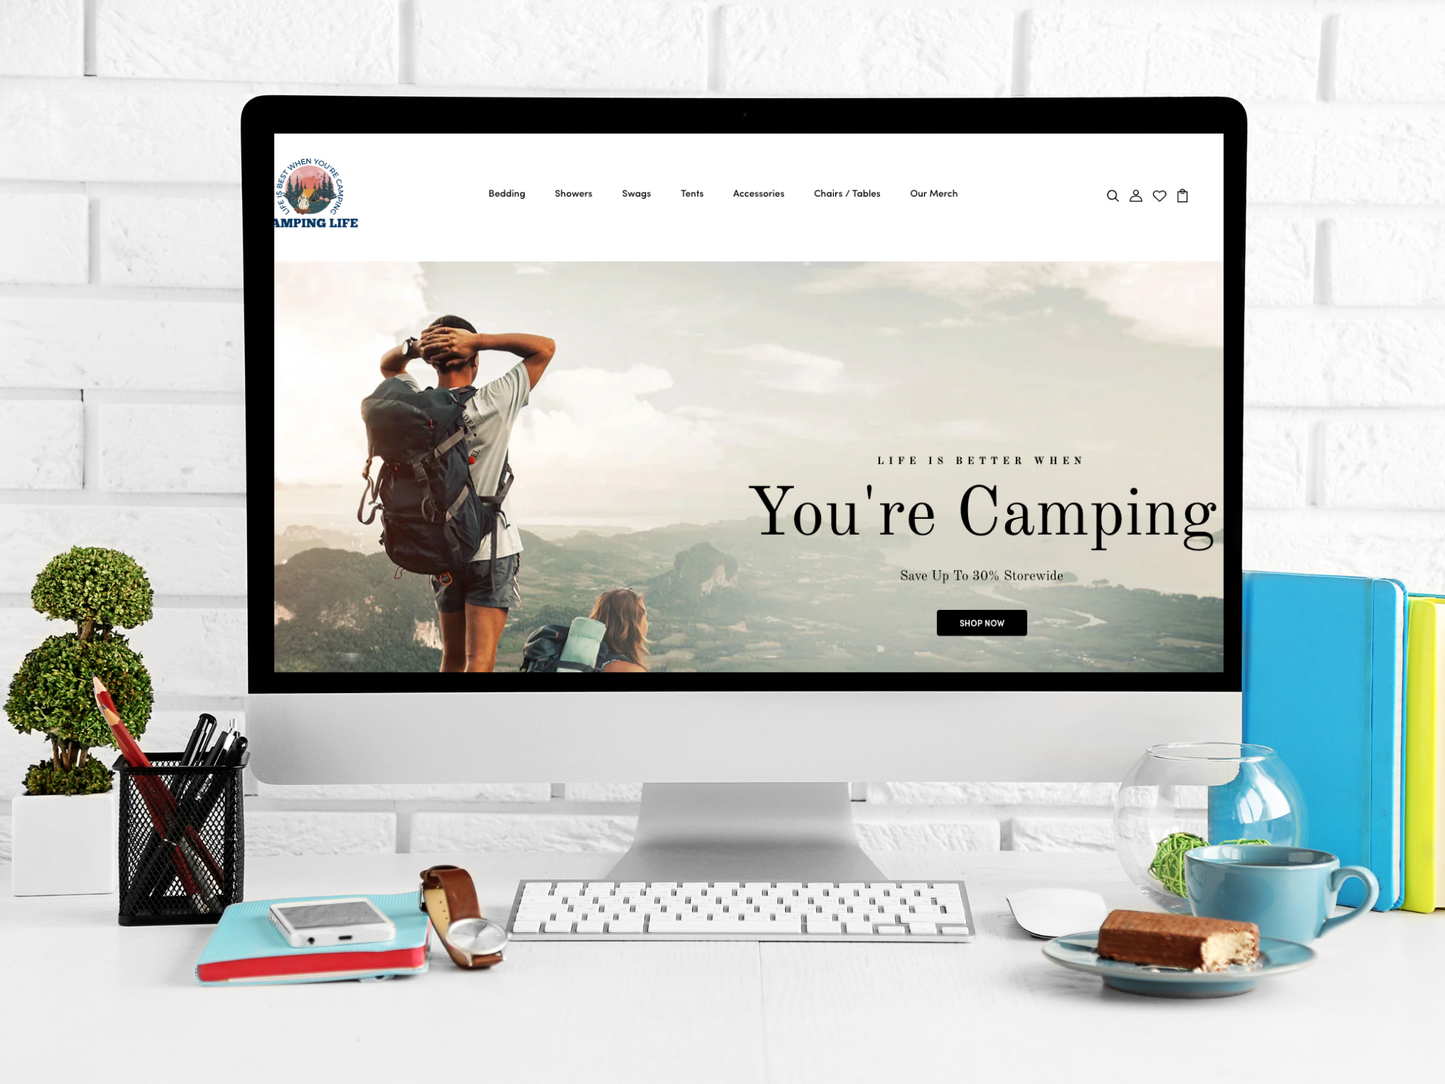 Camping Life - Get Started